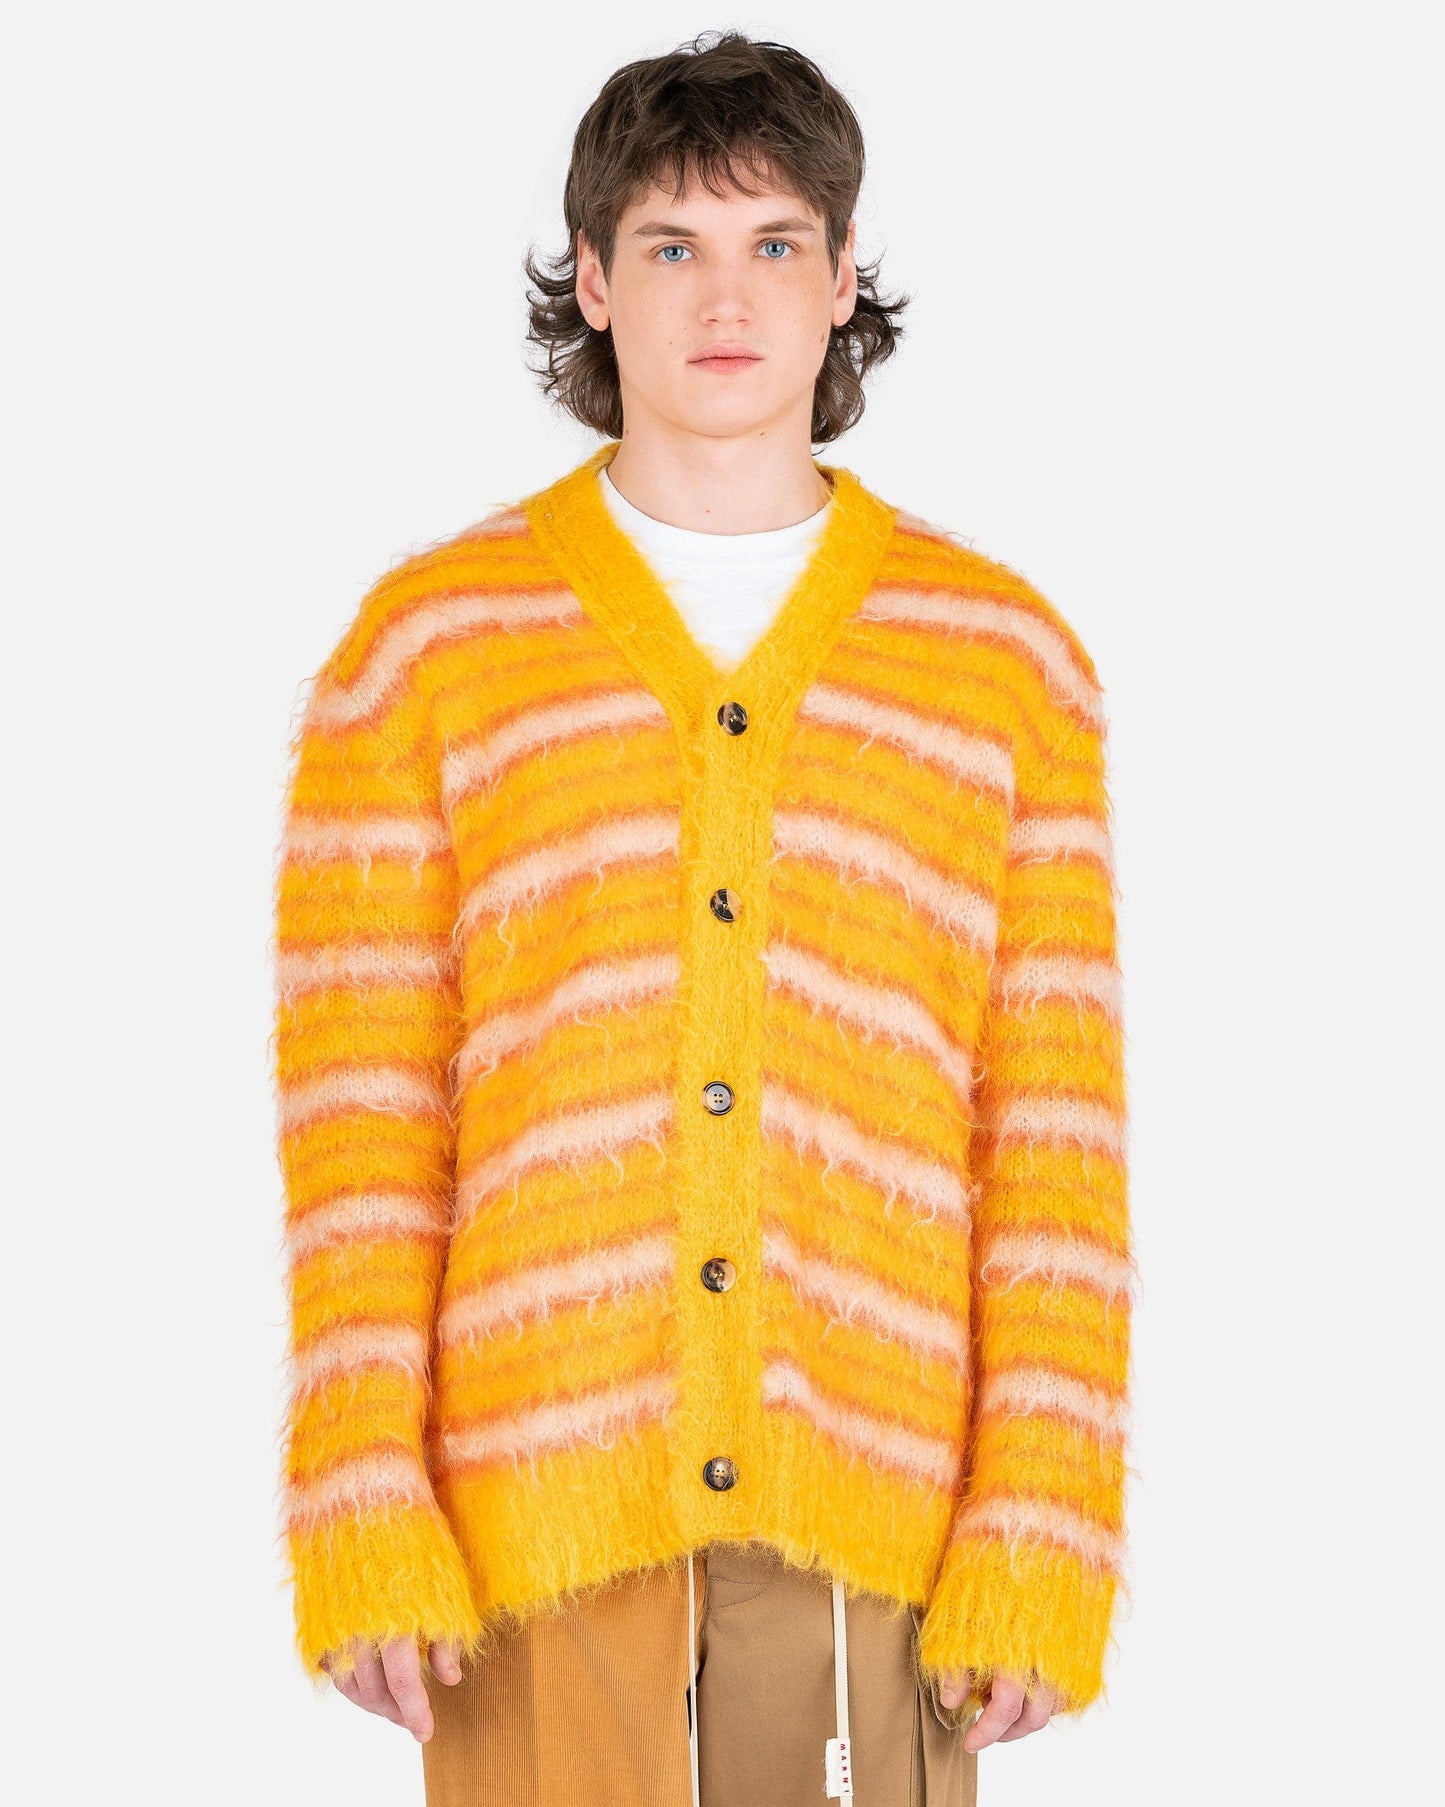 Marni Men's Sweatshirts Iconic Groovy Striped Mohair Cardigan in Maize